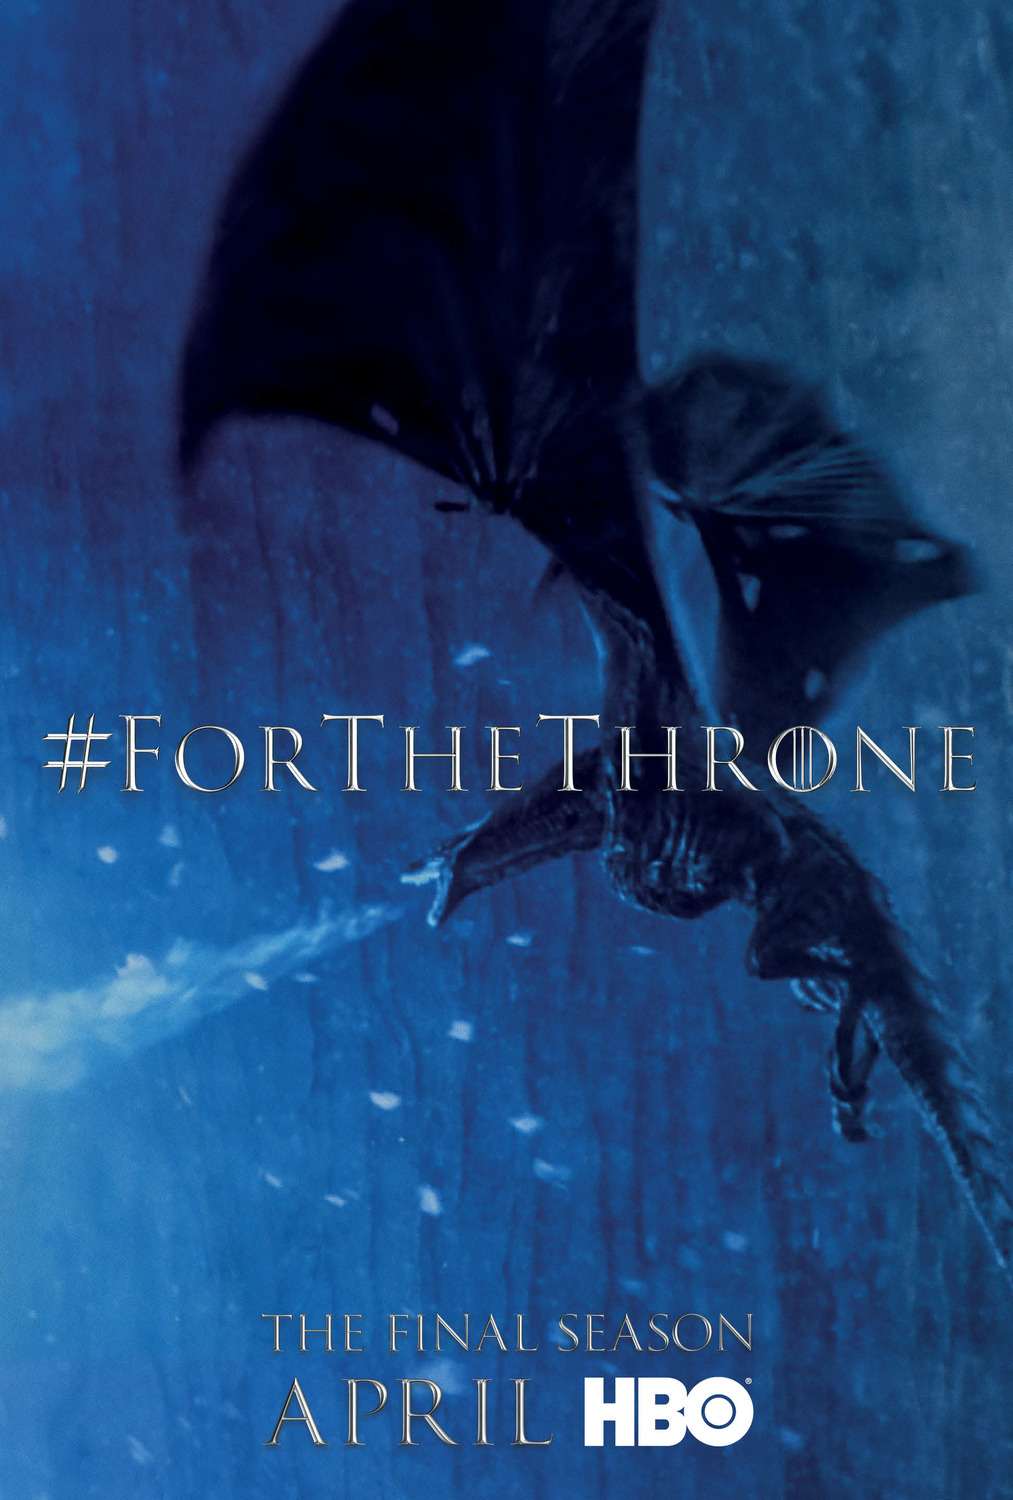 Extra Large Movie Poster Image for Game of Thrones (#97 of 125)